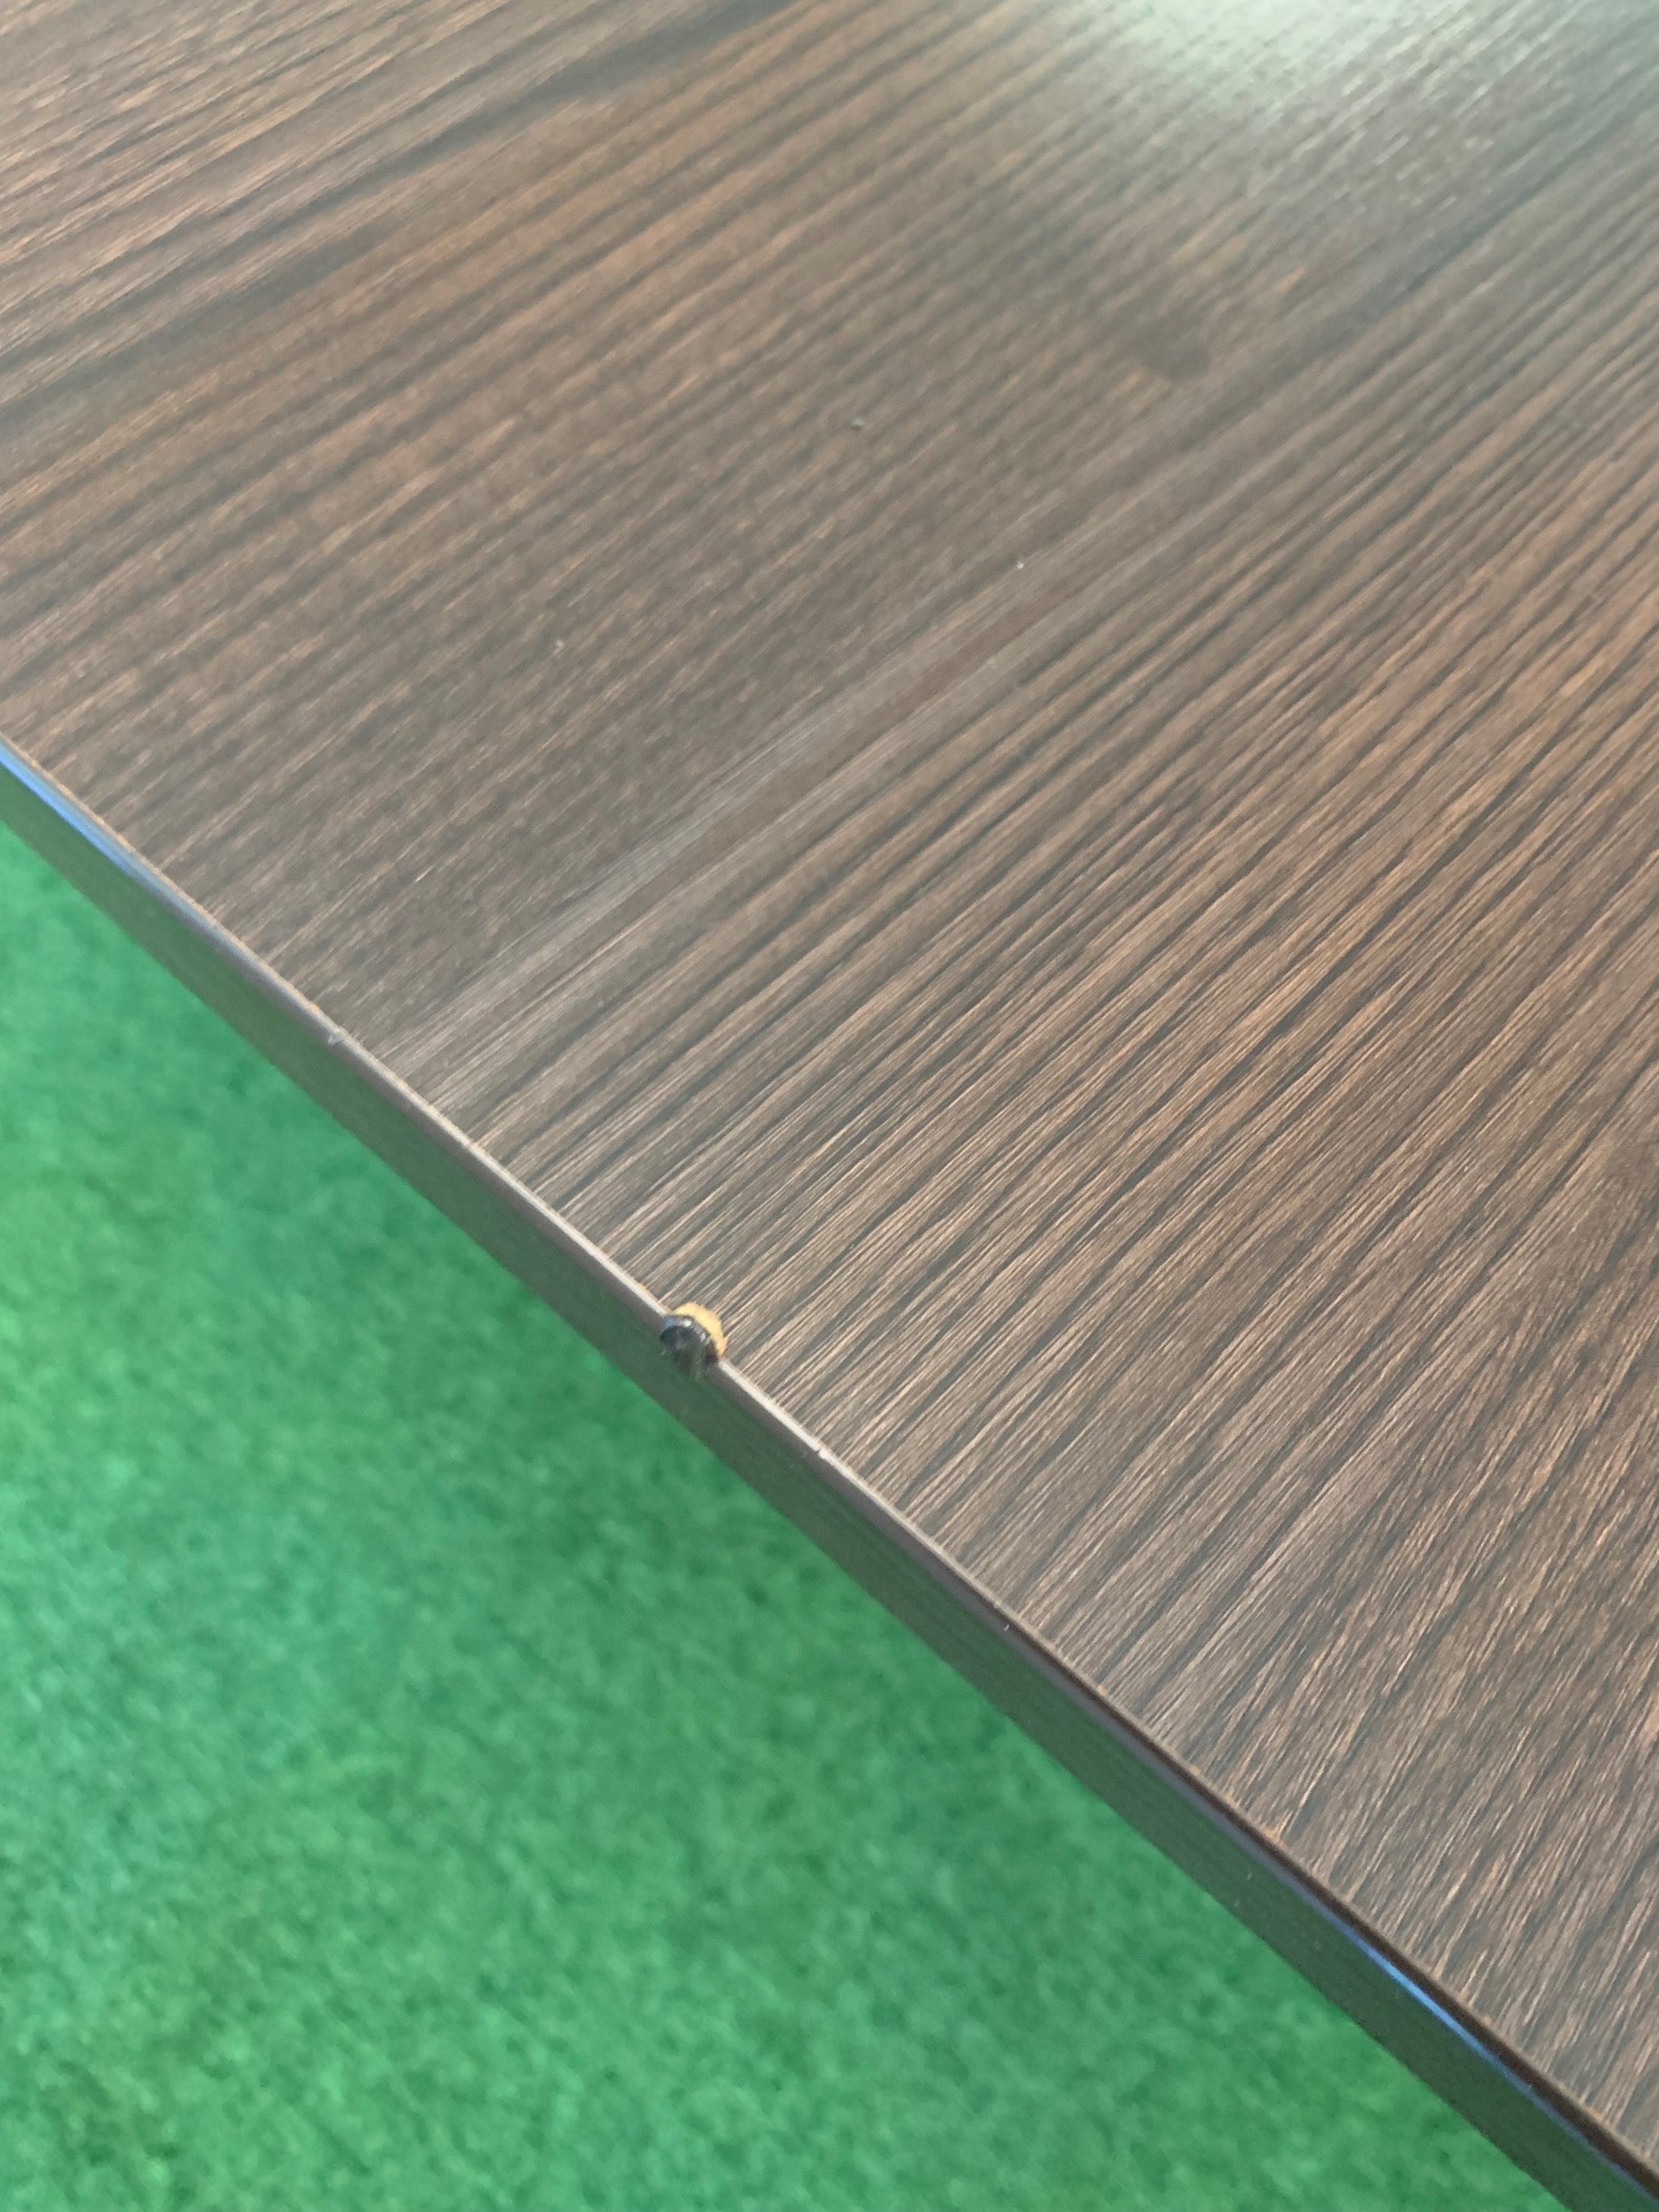 Chip damage on brown boardroom office table